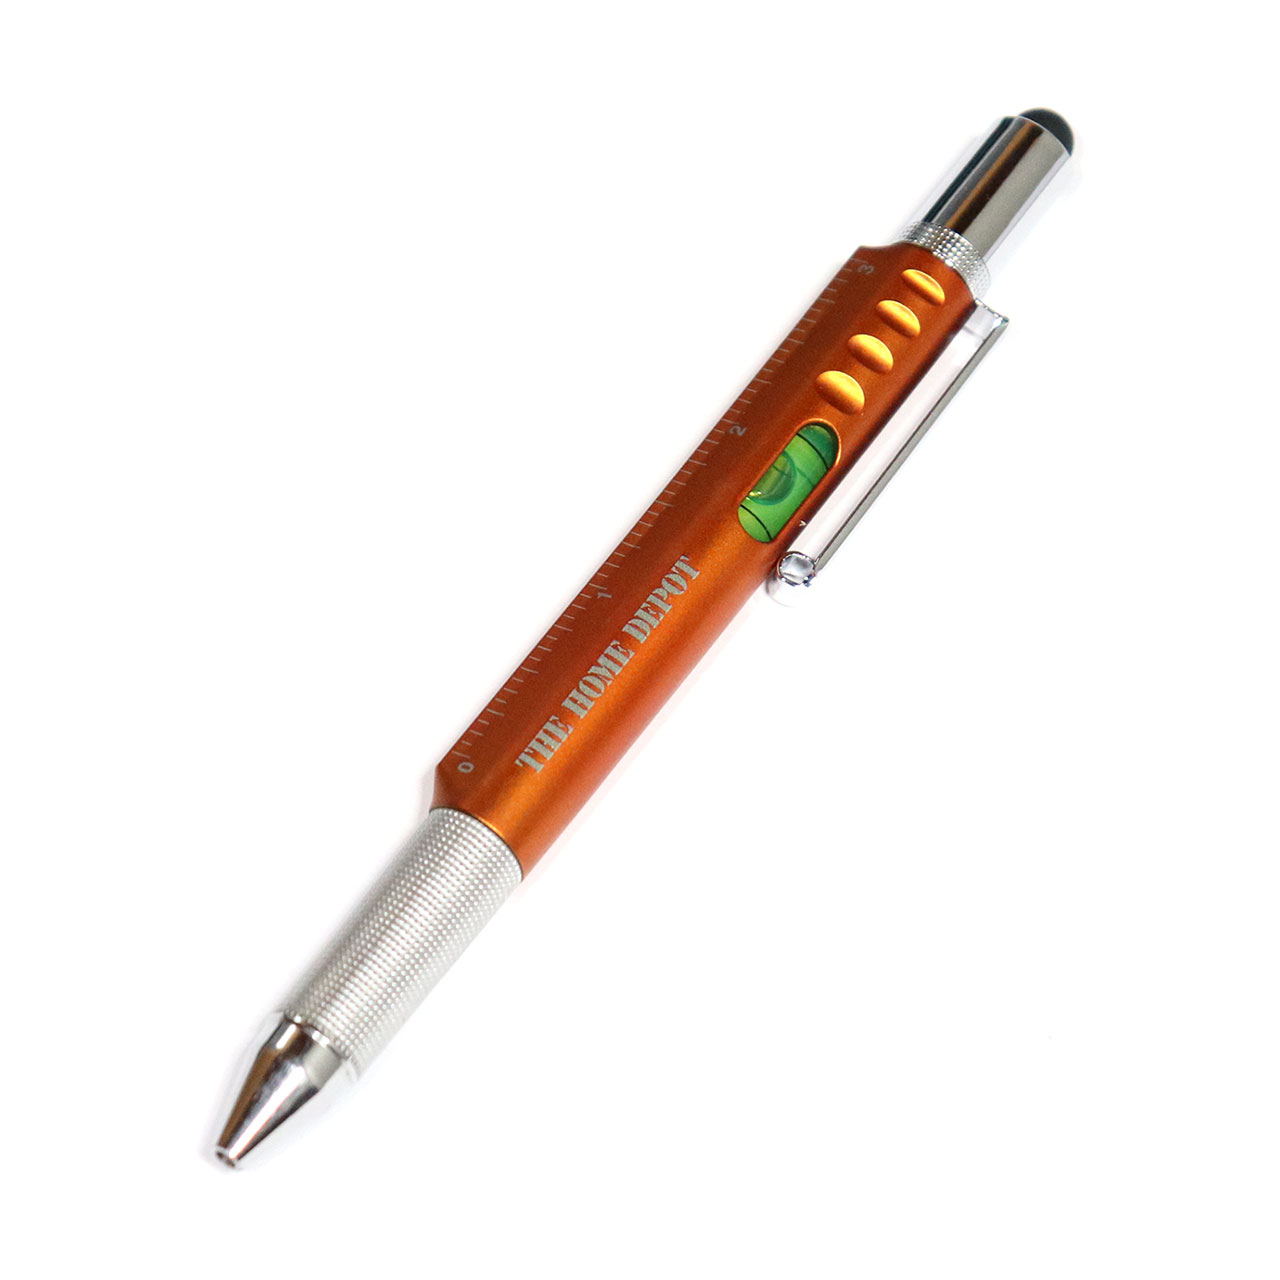 THE HOME DEPOT ホームデポ ボールペン 多機能 ツール アメリカ 輸入 雑貨 6-in-1 Pen :457156607968:OSS  通販 